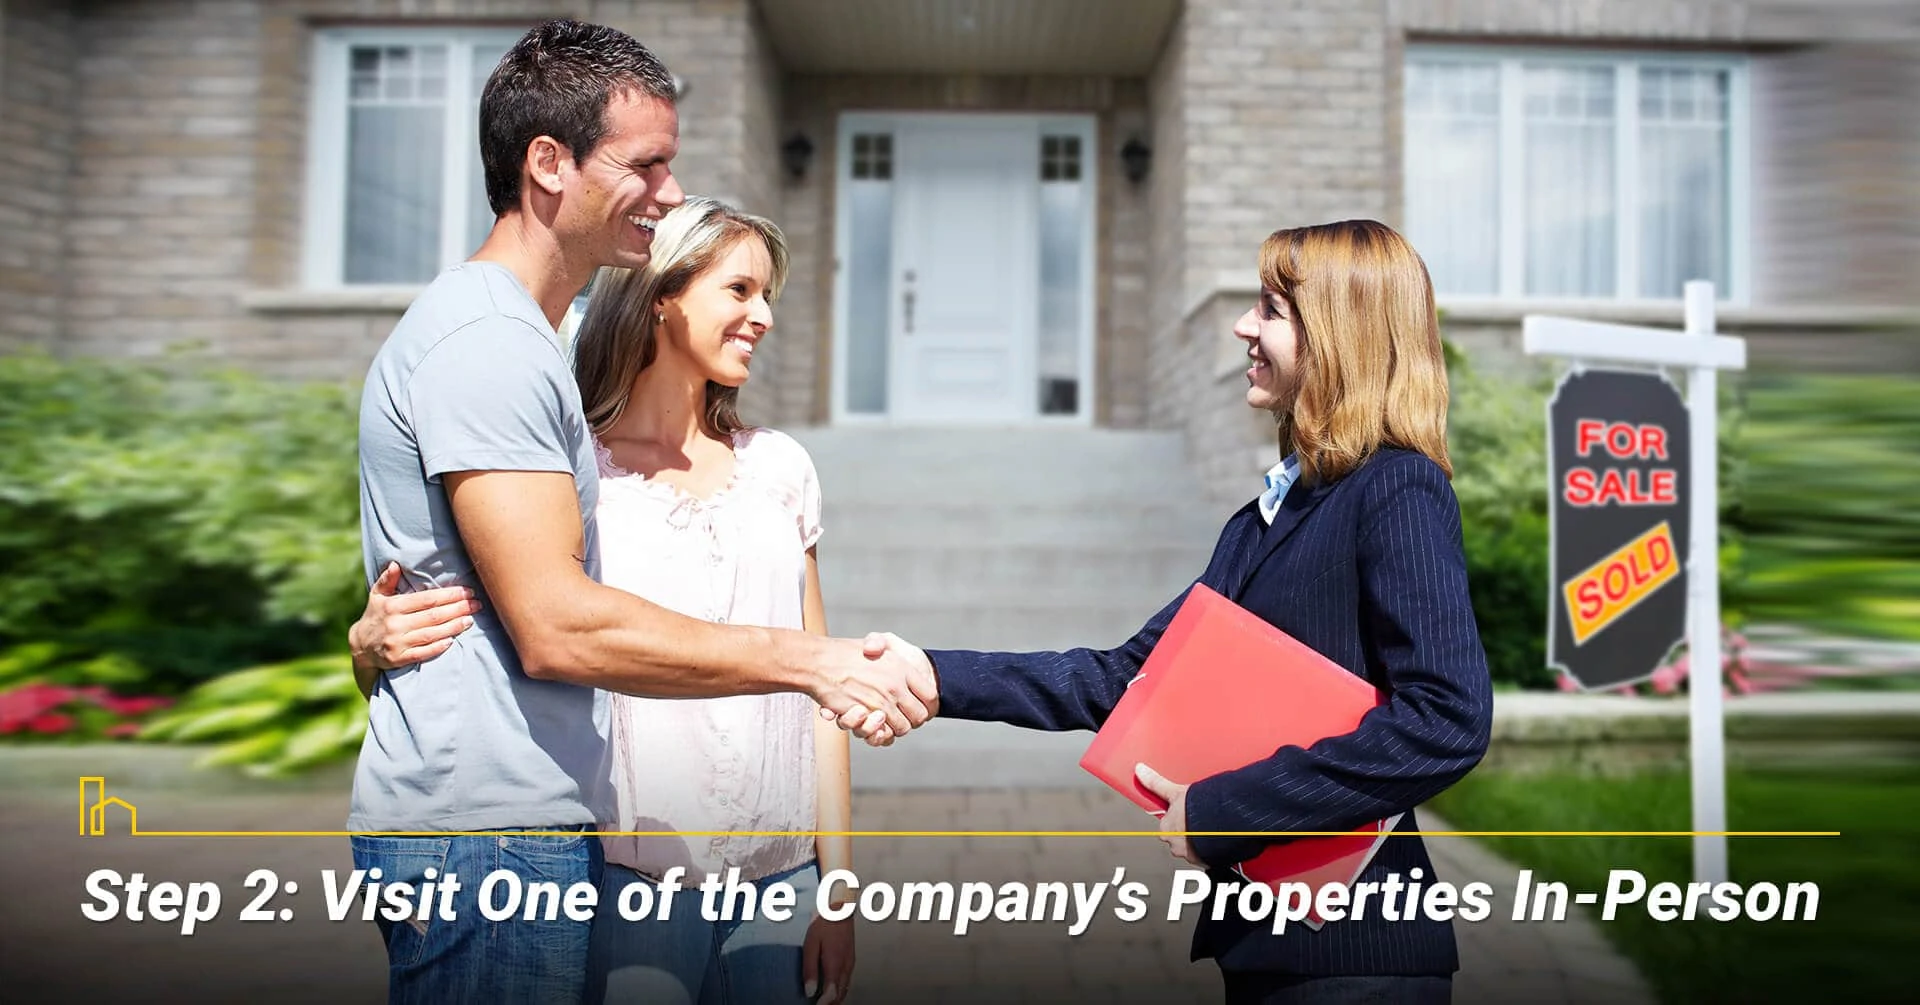 Step 2: Visit One of the Company’s Properties In-Person, conduct a site visit